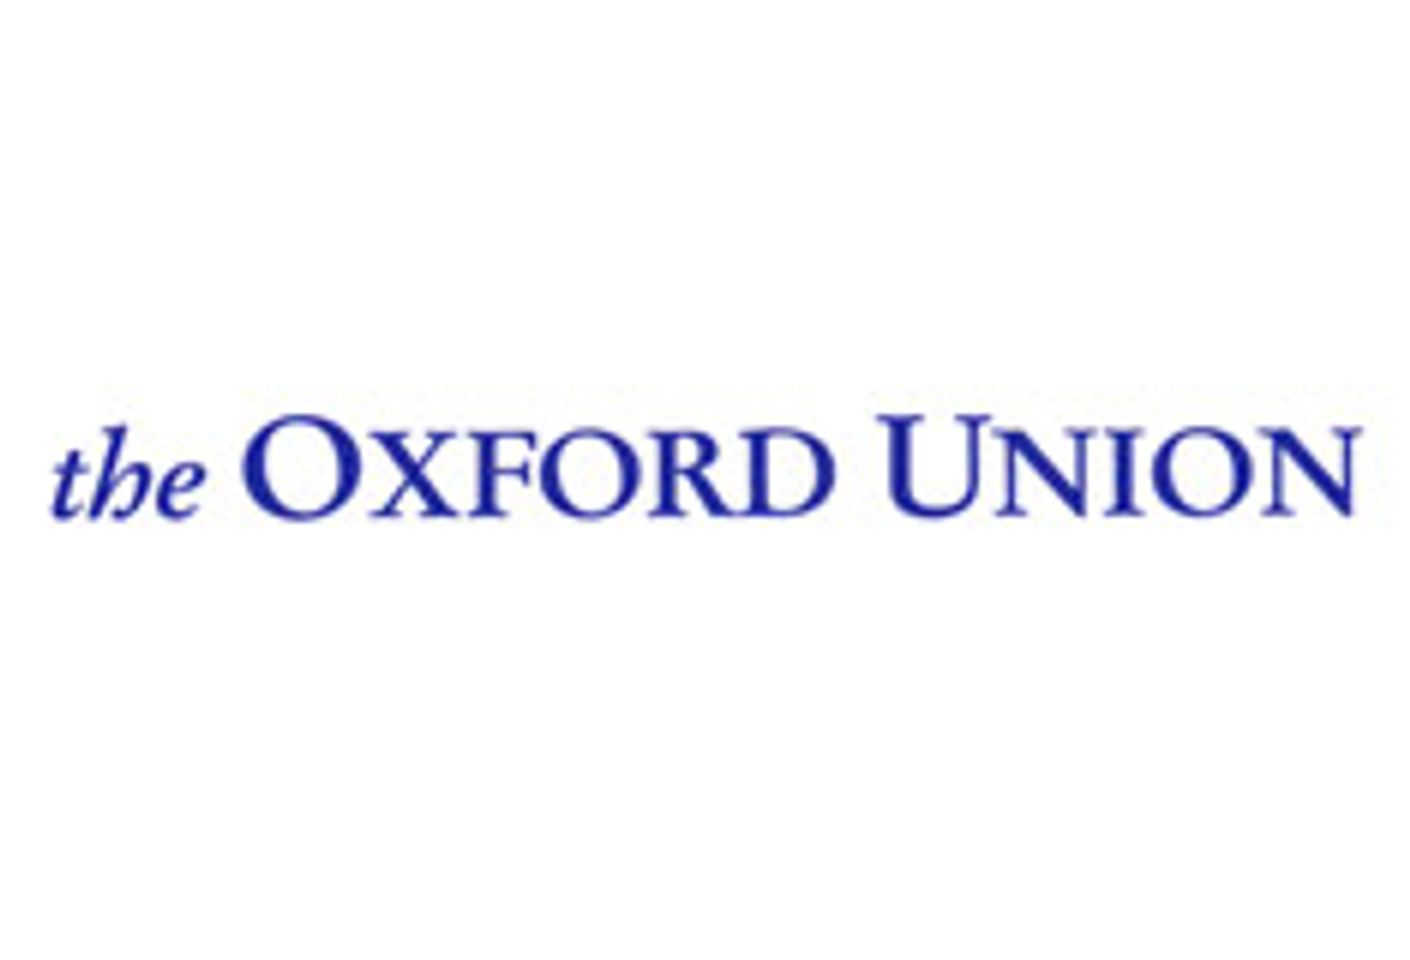 Oxford Union Debate Concludes Porn Beneficial to Society